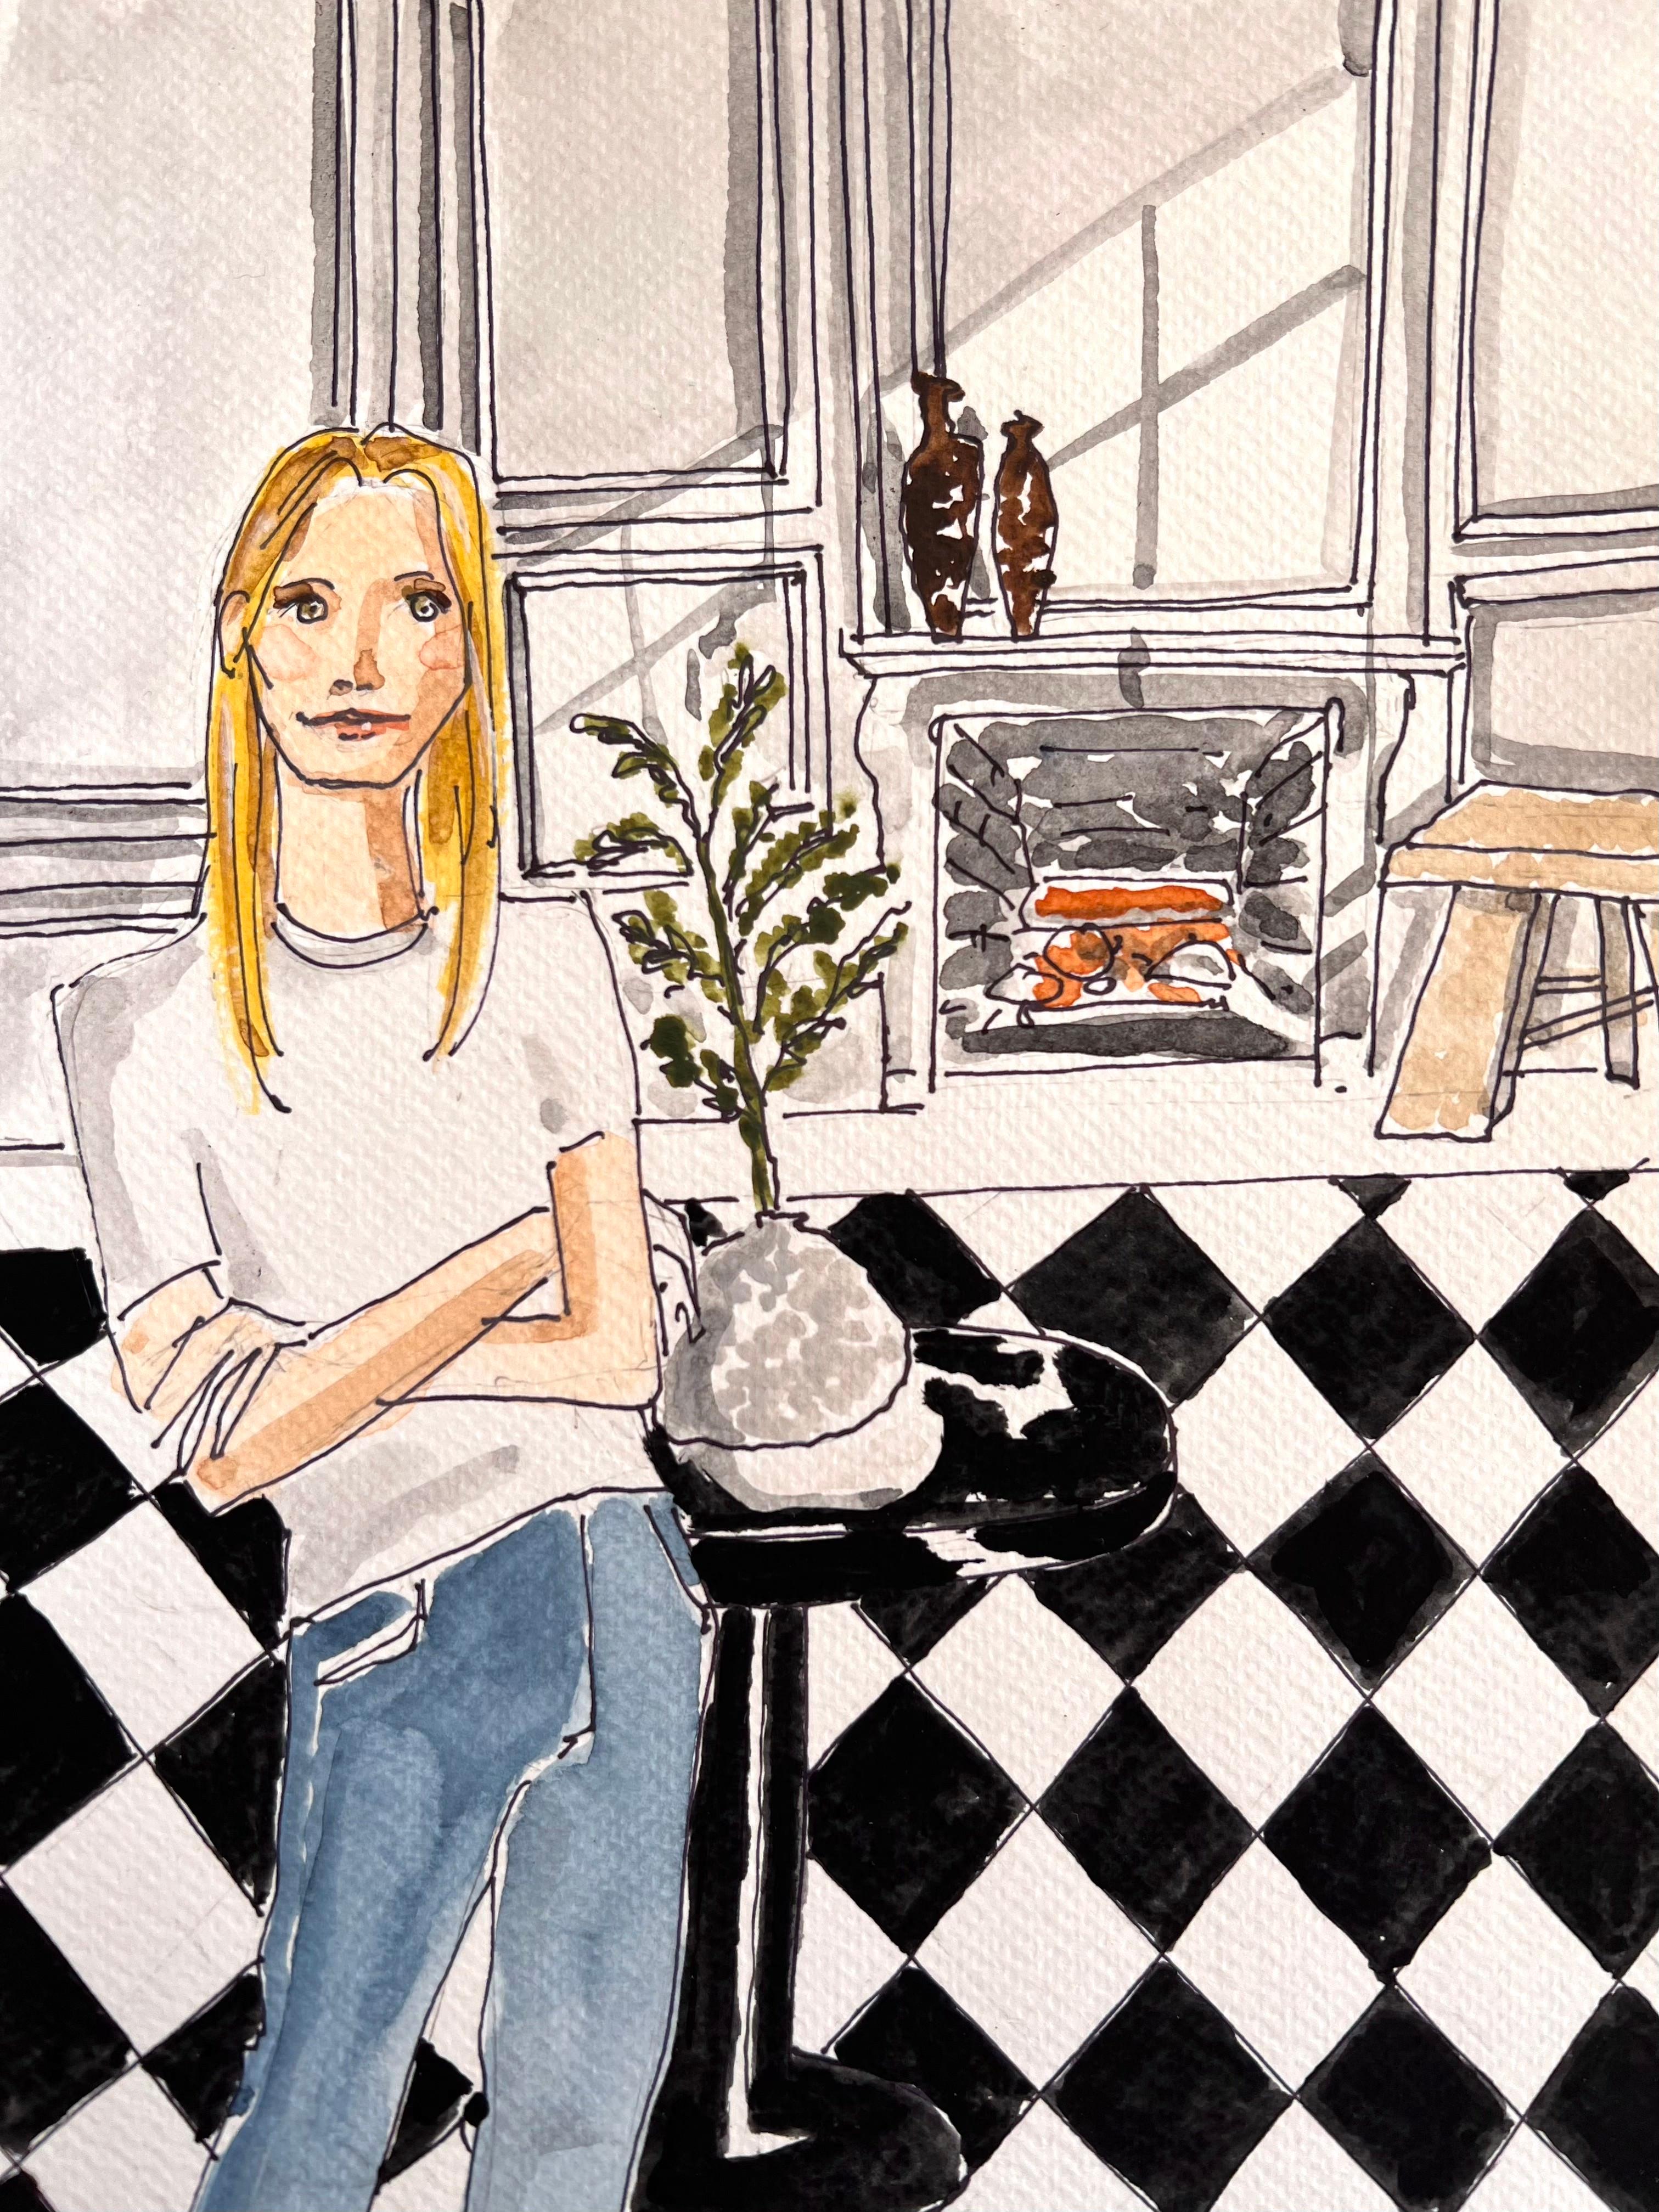 Actress Gwyneth Paltrow at home in Montecito, CA Ink and watercolor on paper